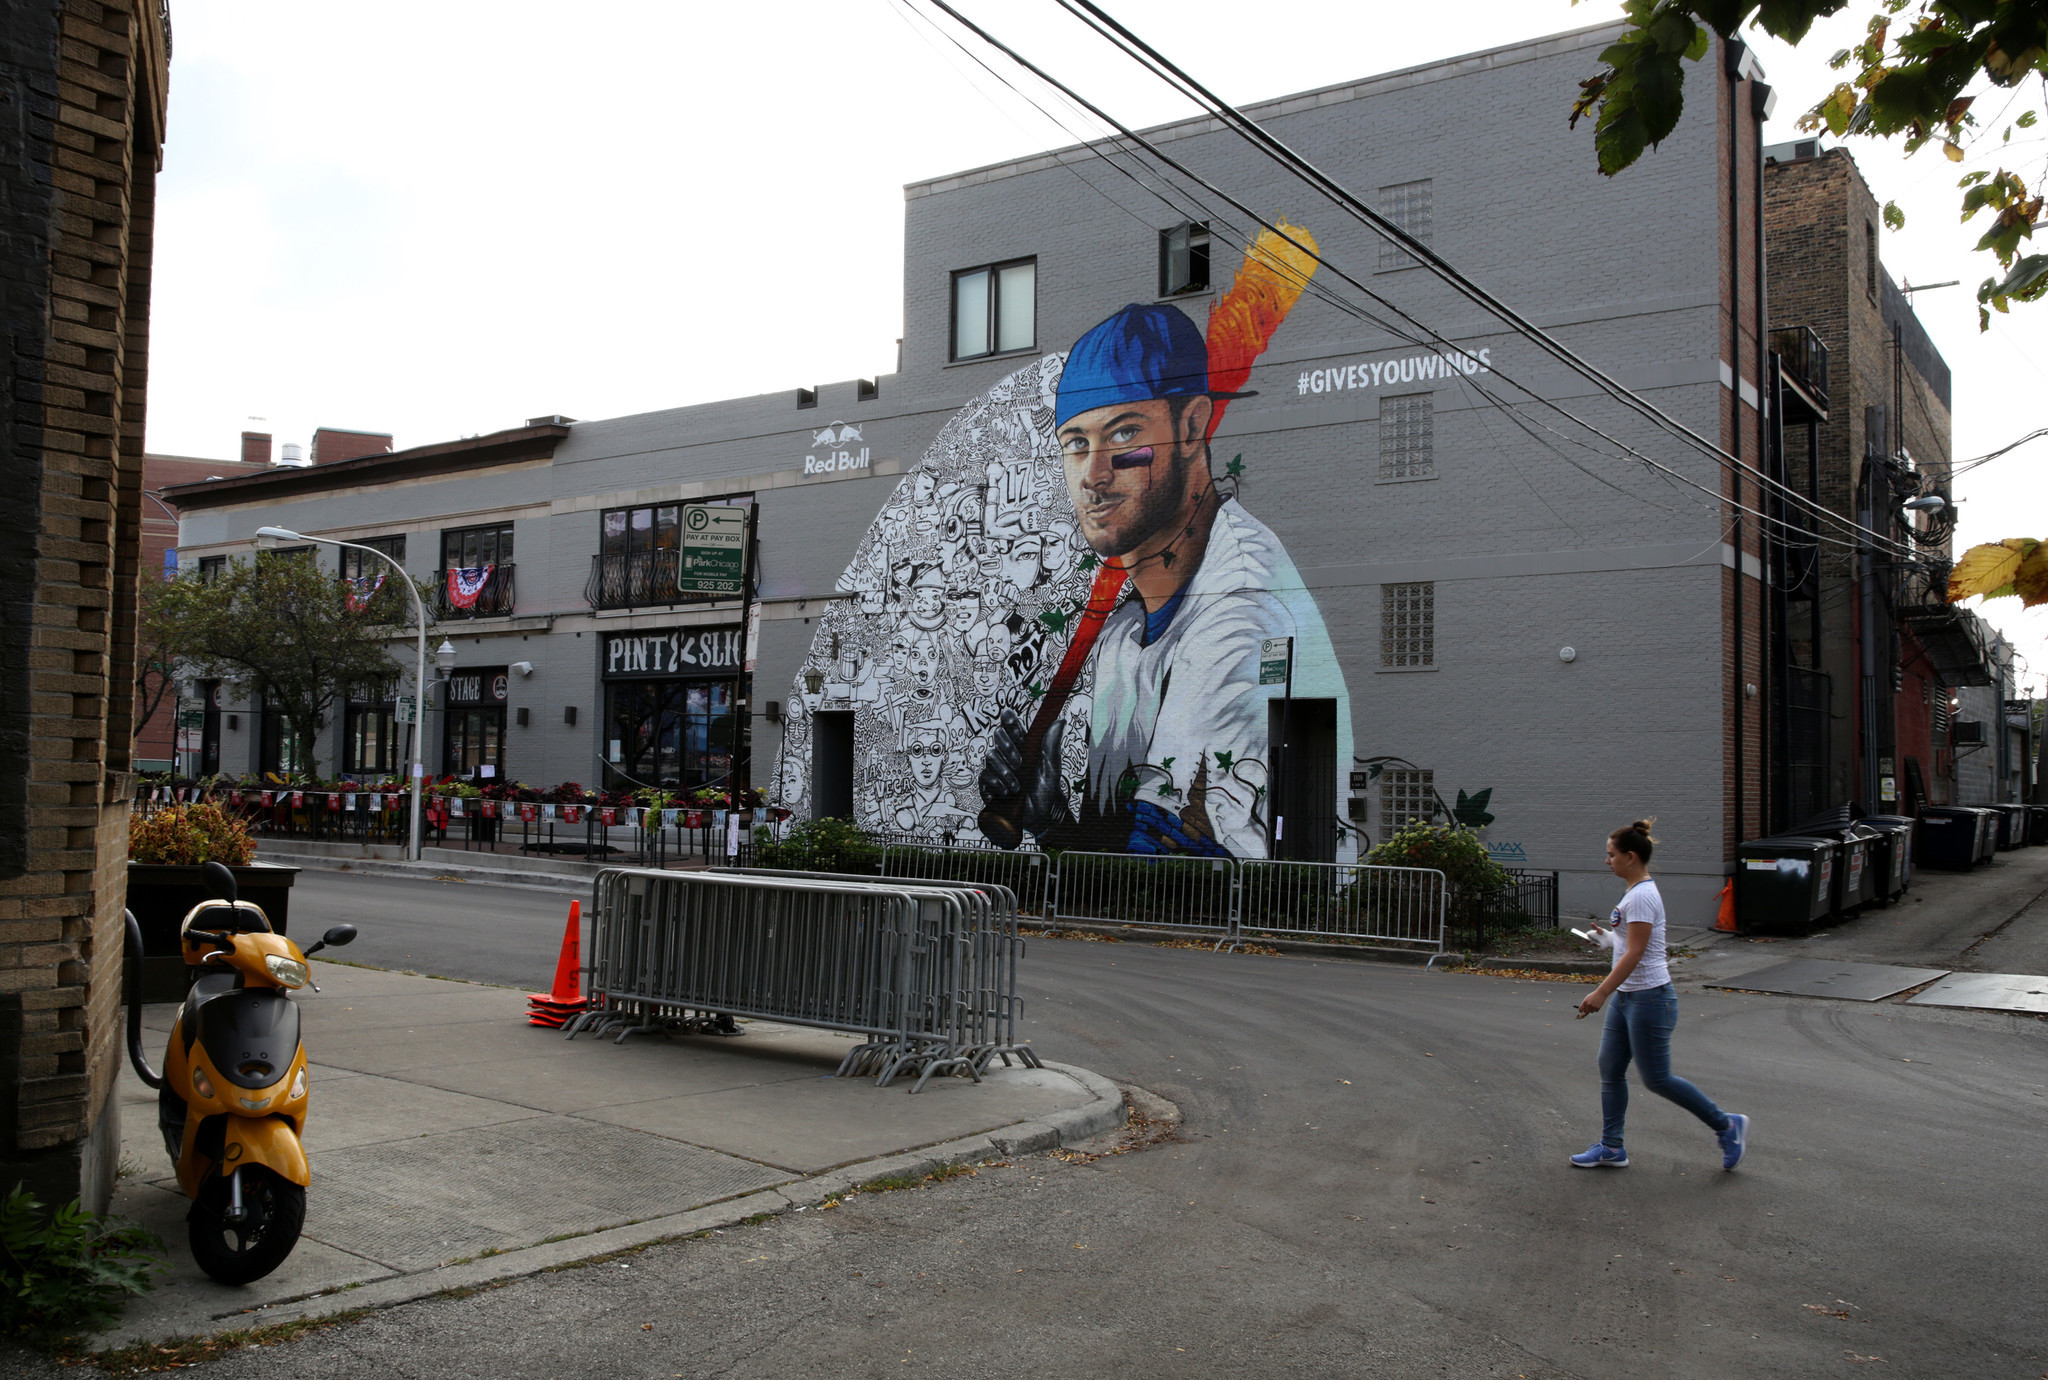 Wrigleyville becoming refined, redefined